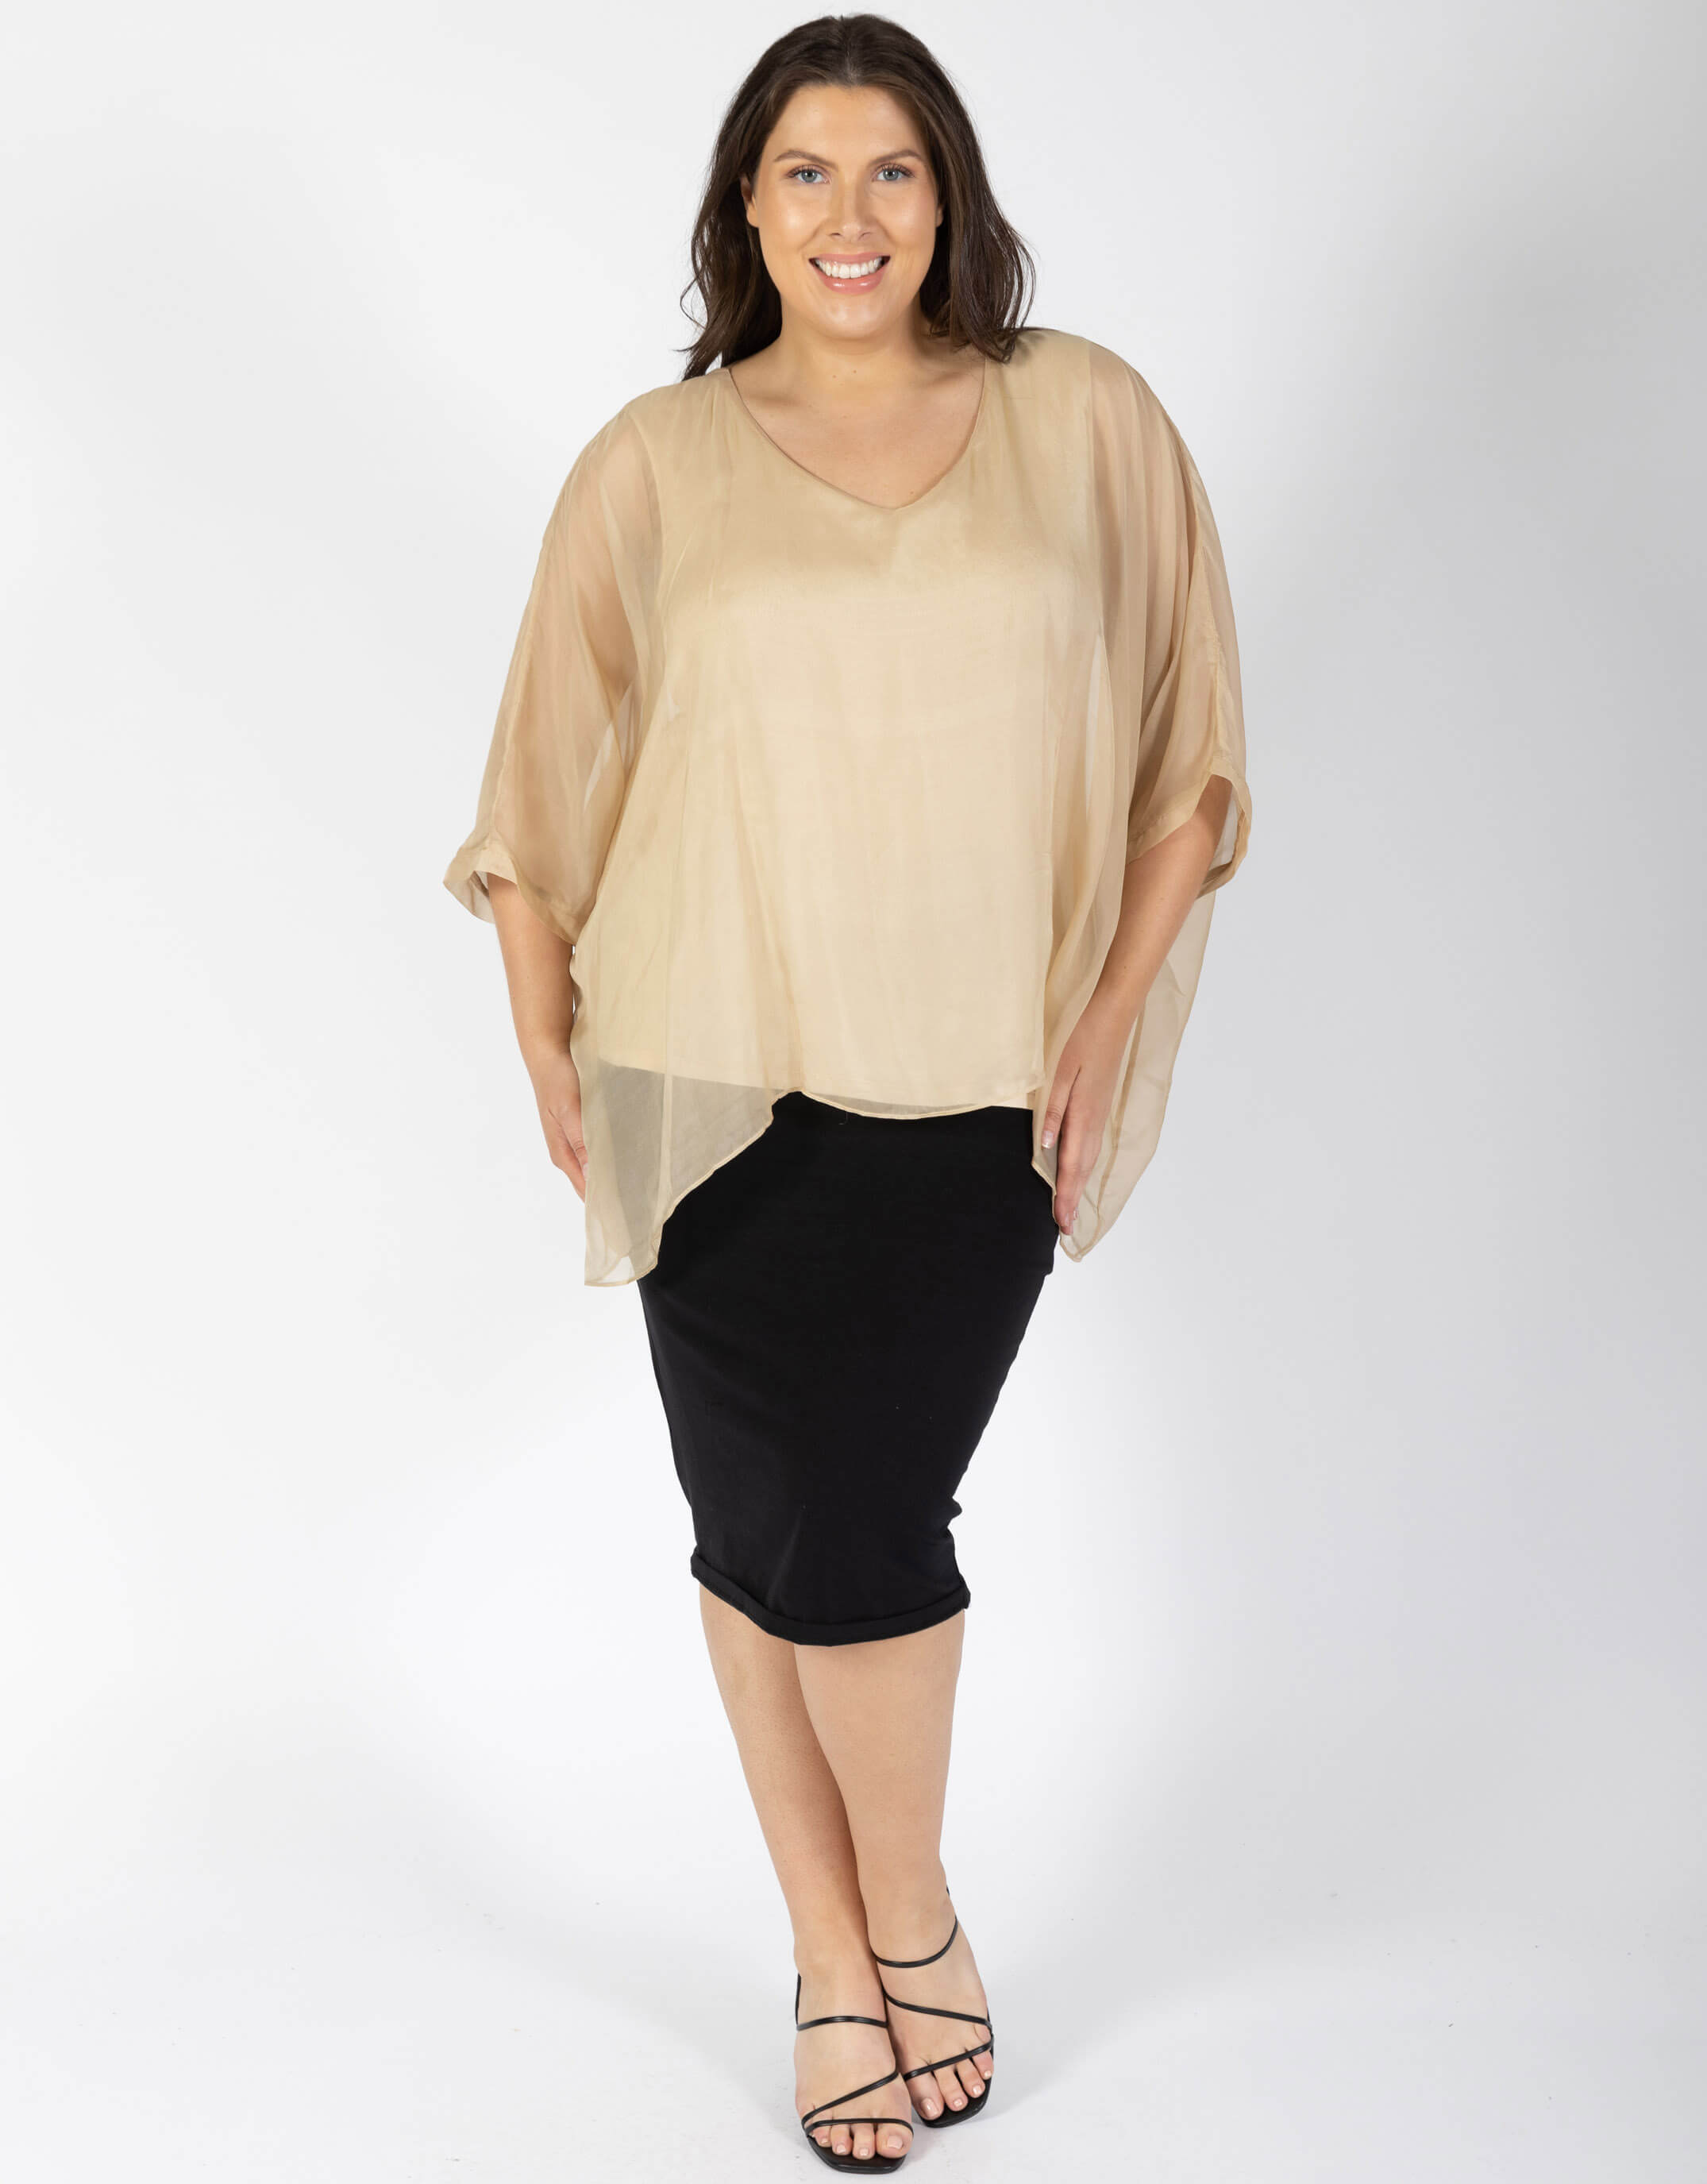 fate-becker-plus-size-summer-fever-top-champagne-womens-plus-size-clothing